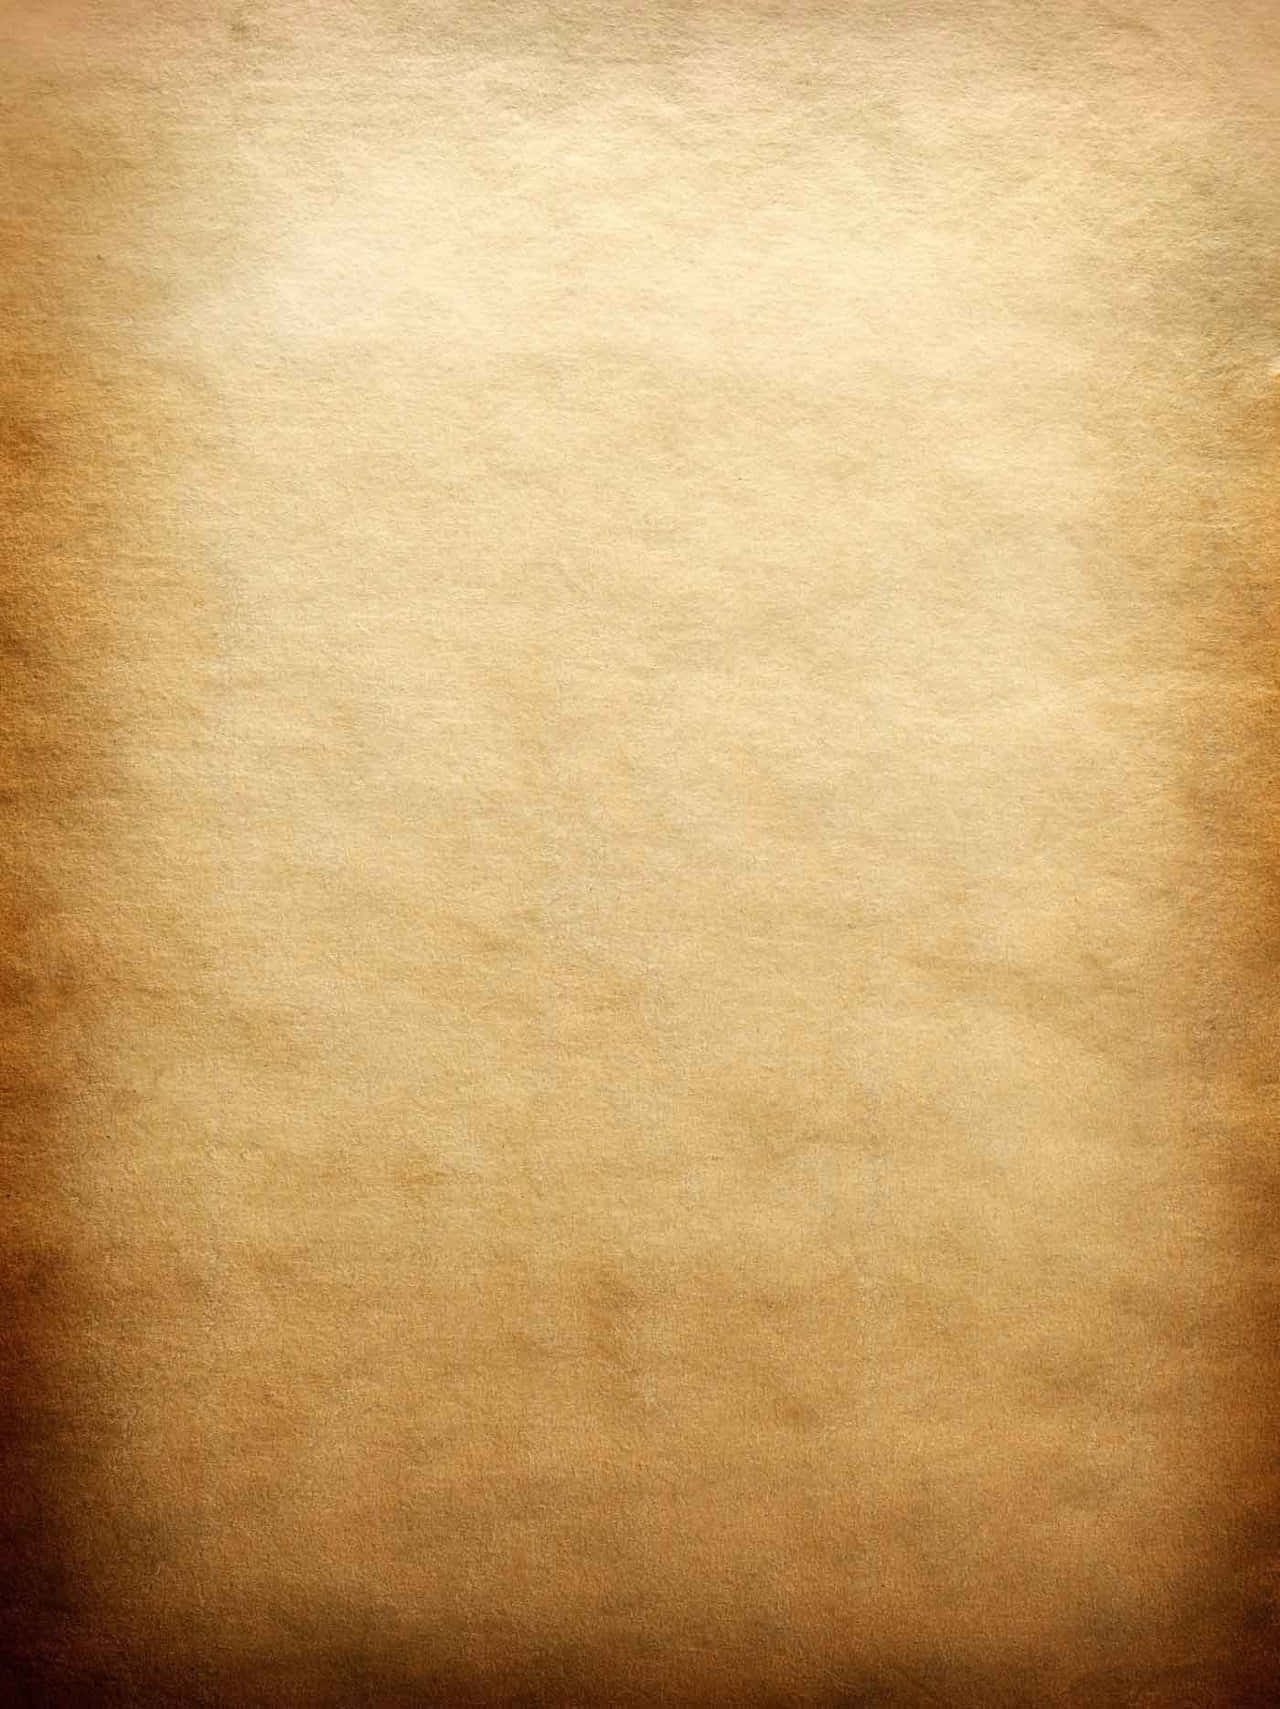 Parchment Paper Background Bright Brown Background